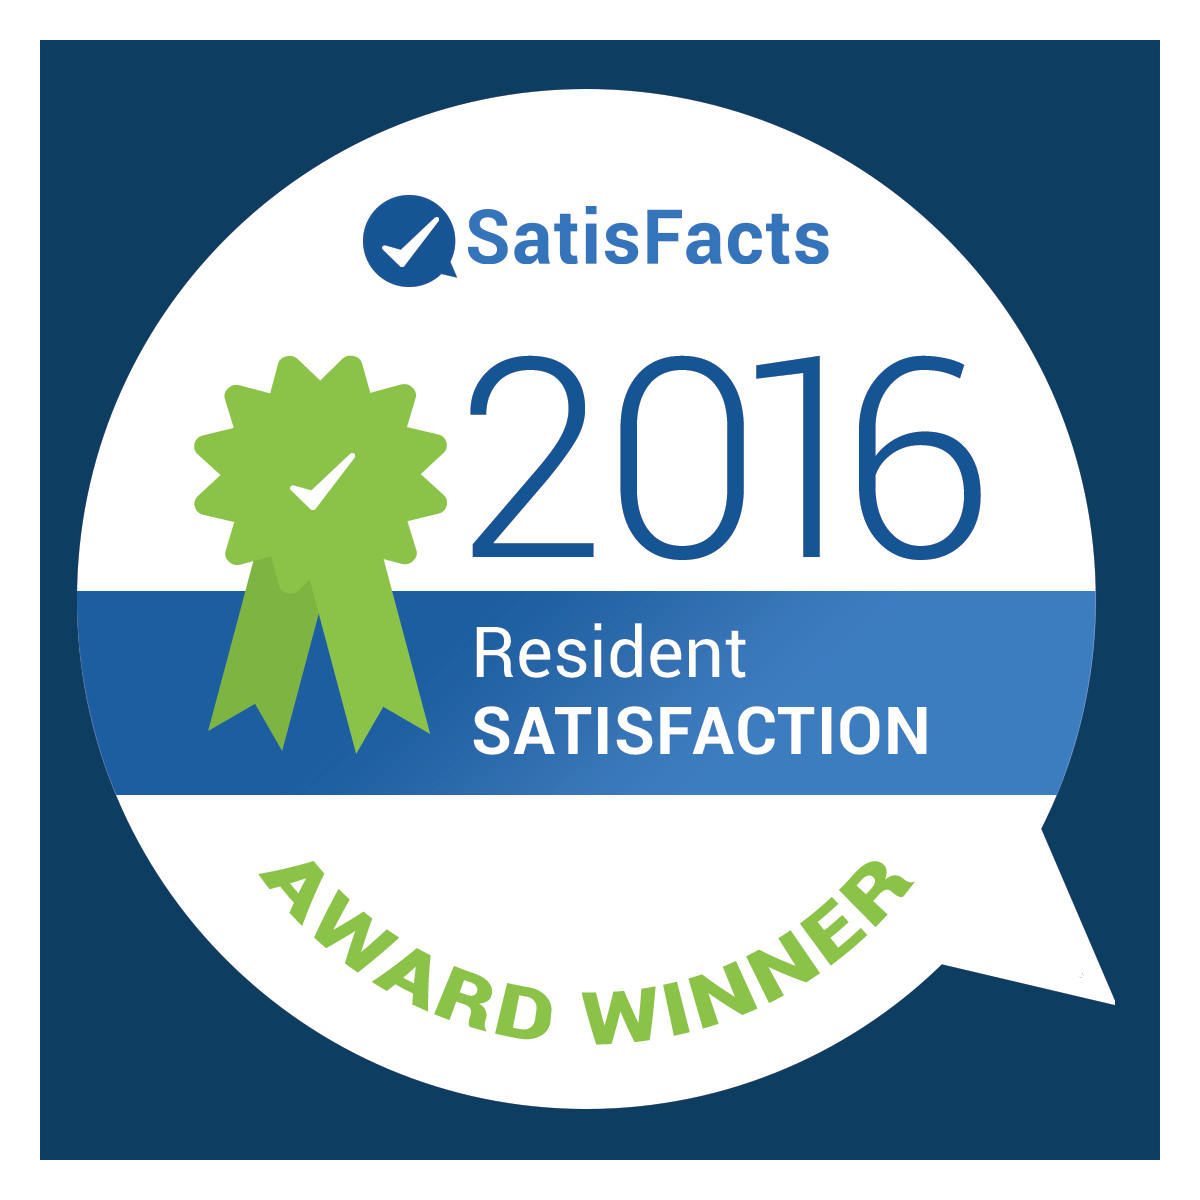 It's Official - 2016 Resident Satisfaction Winners!